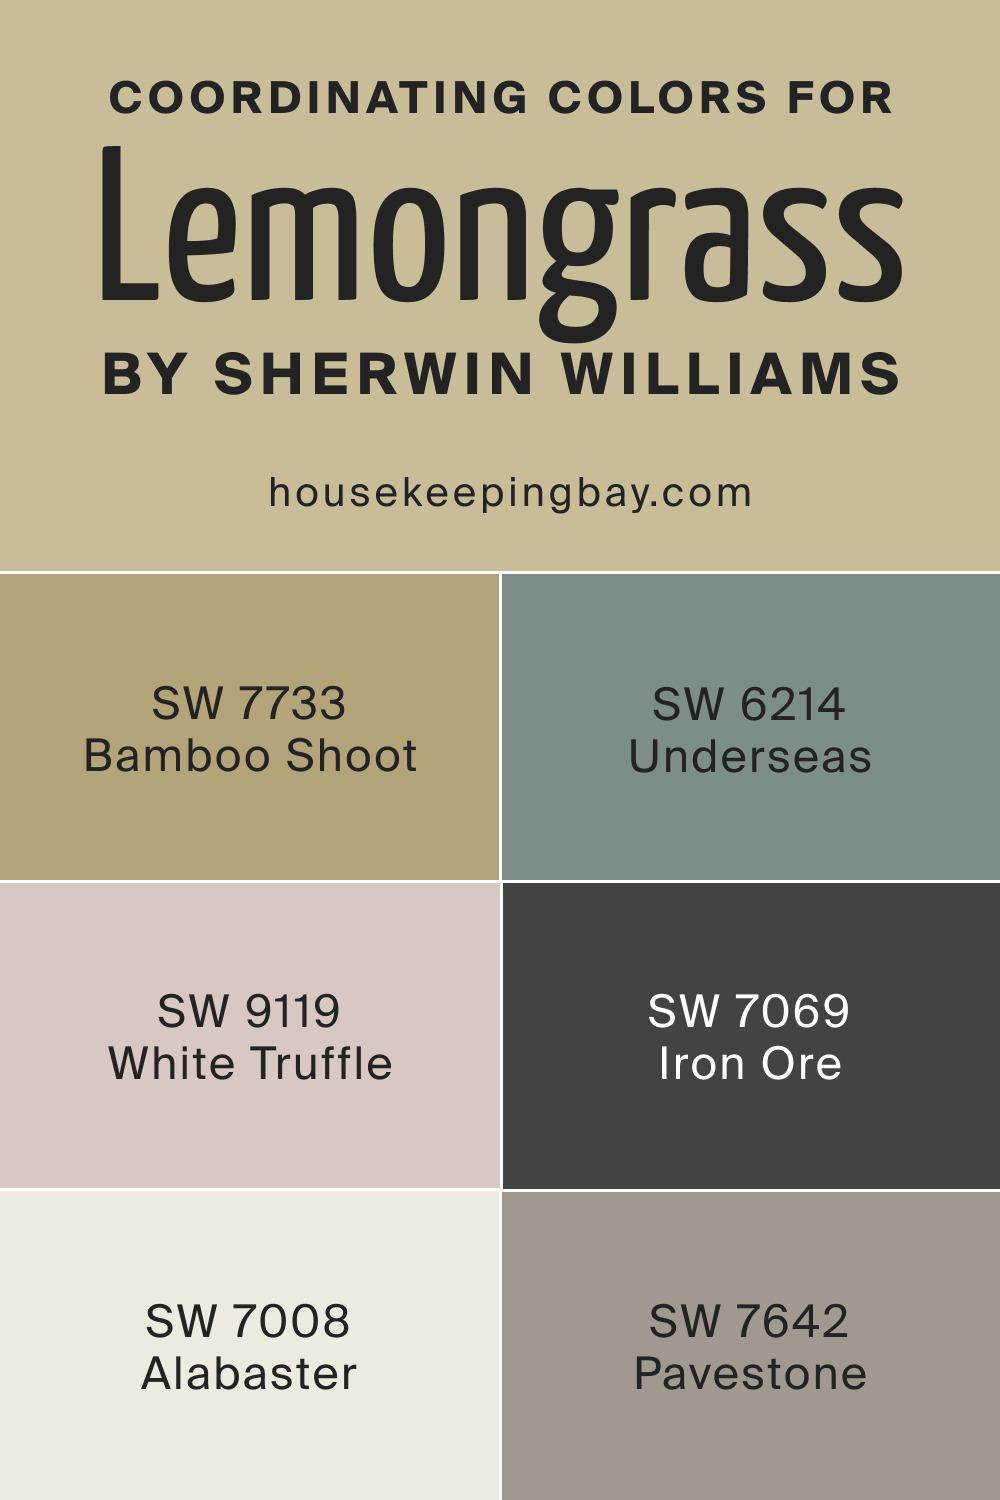 Coordinating Colors for SW 7732 Lemongrass by Sherwin Williams